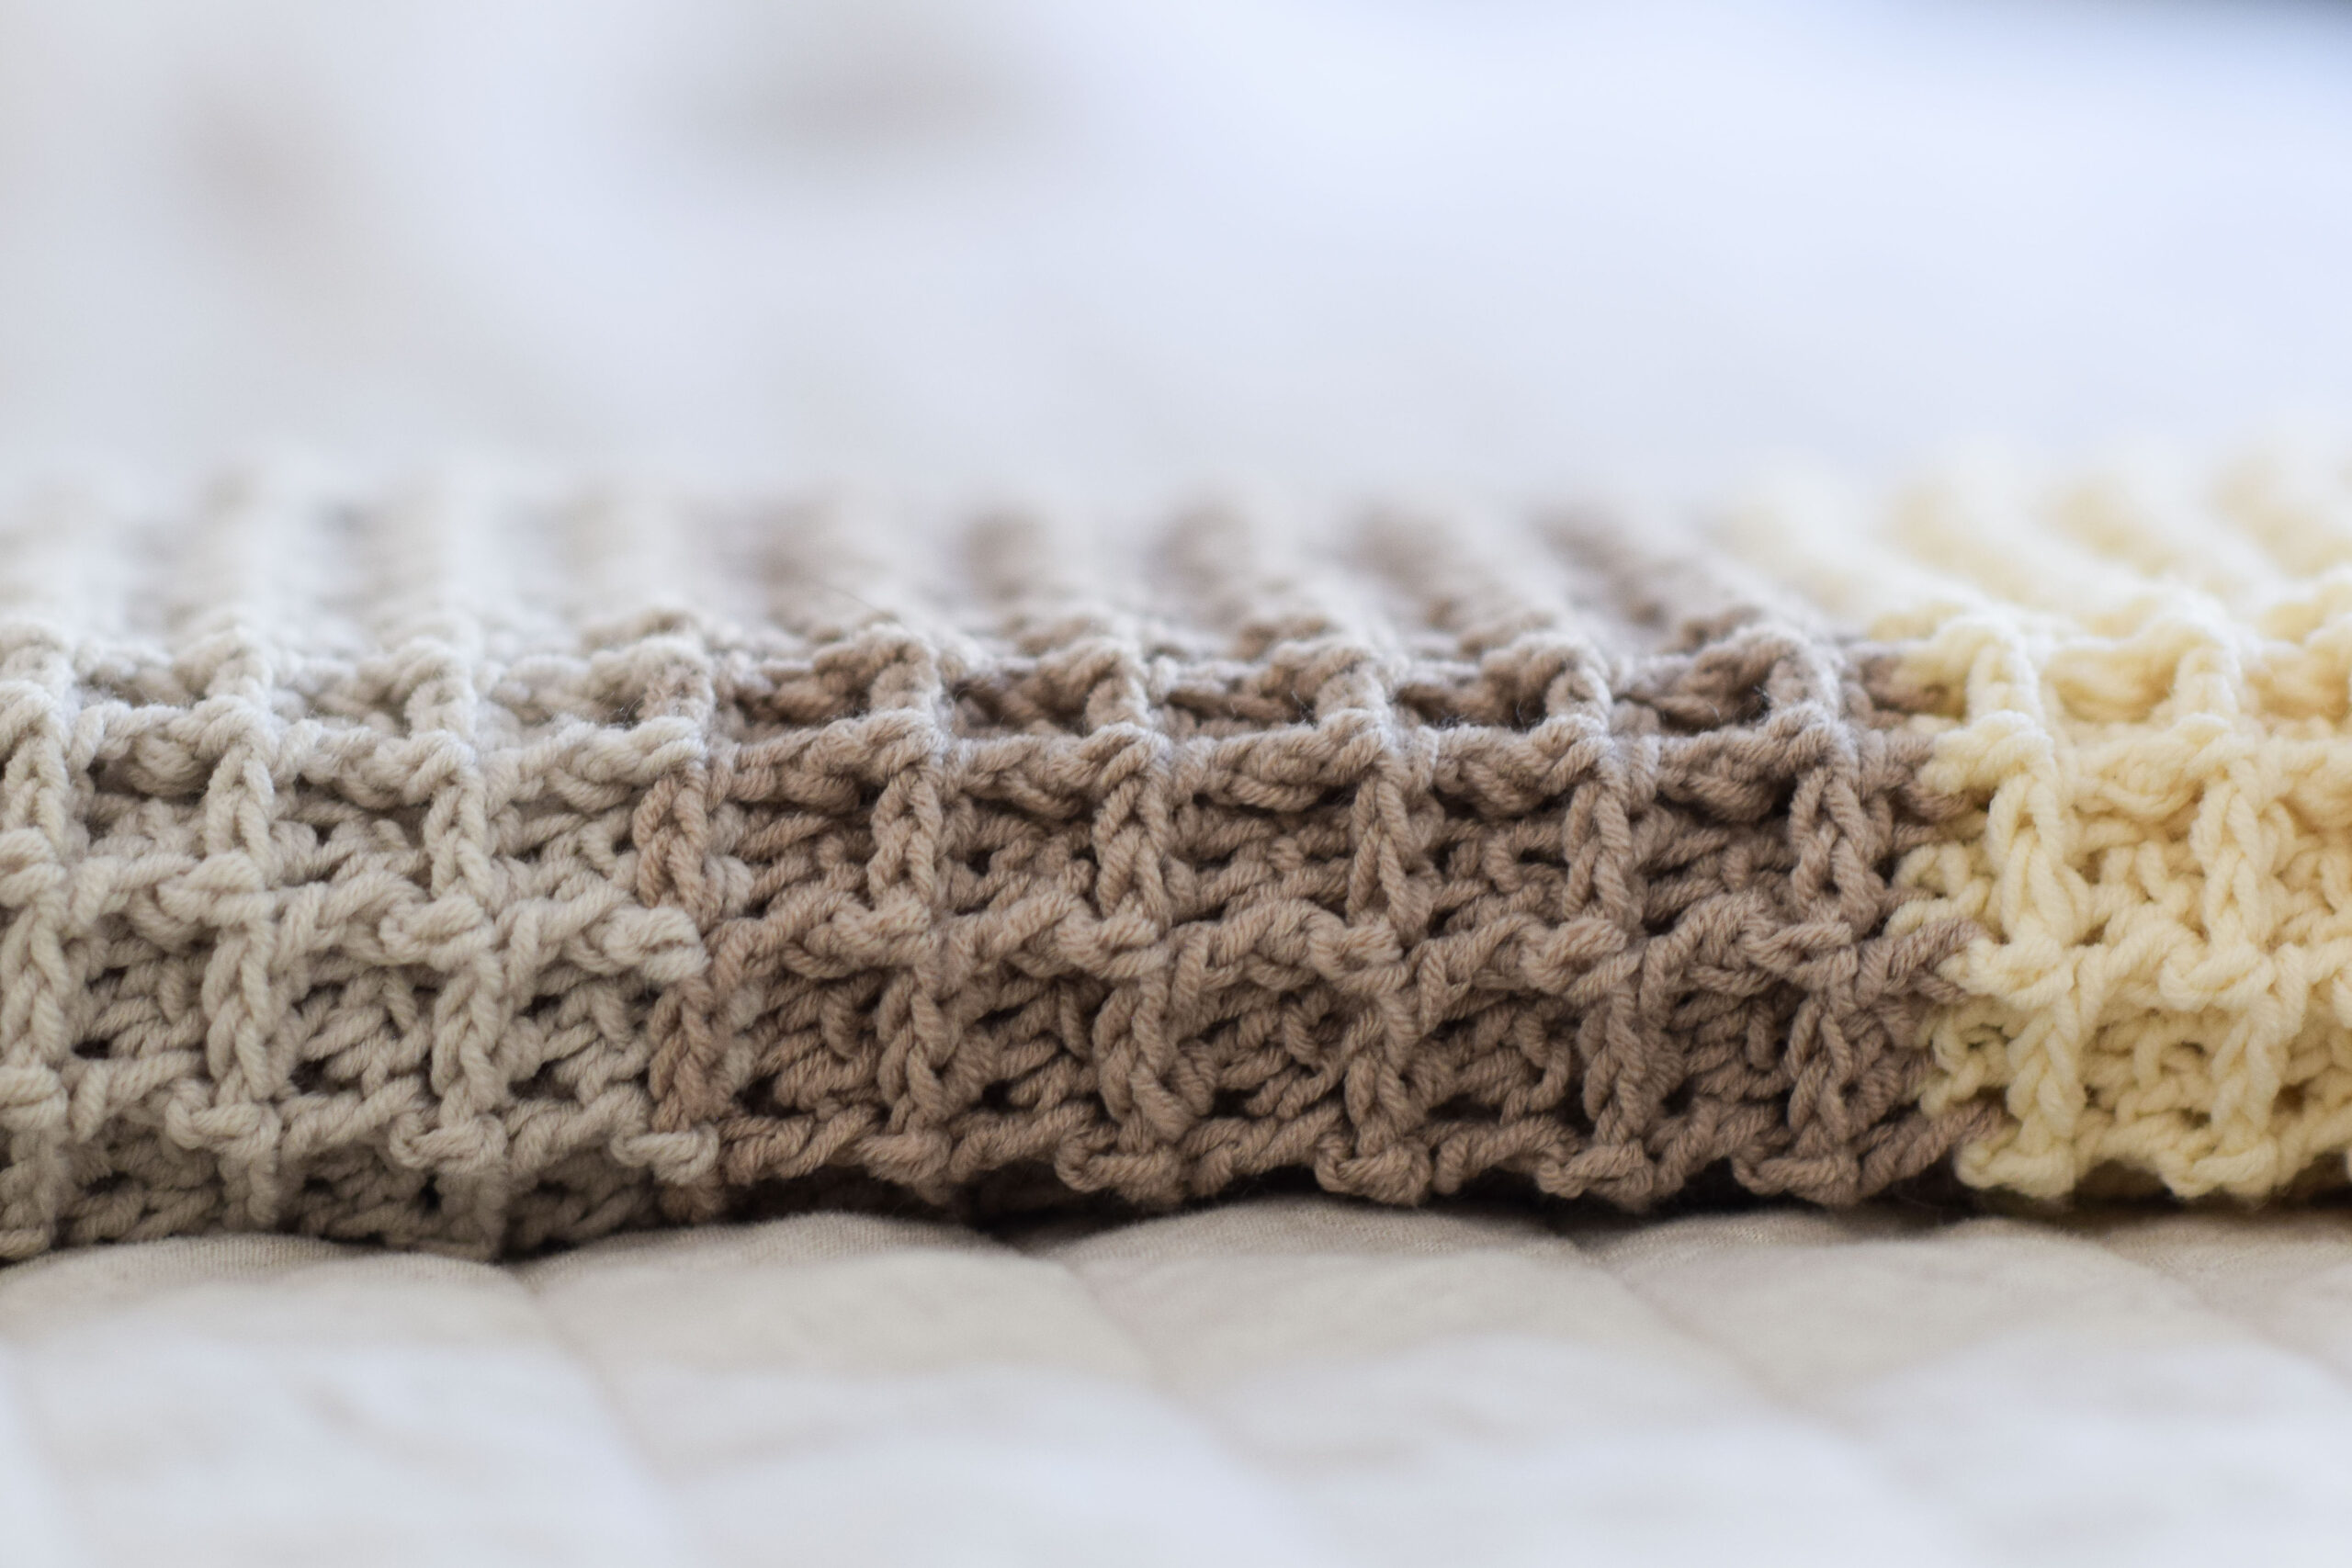 Free Crochet Patterns Archives – Mama In A Stitch